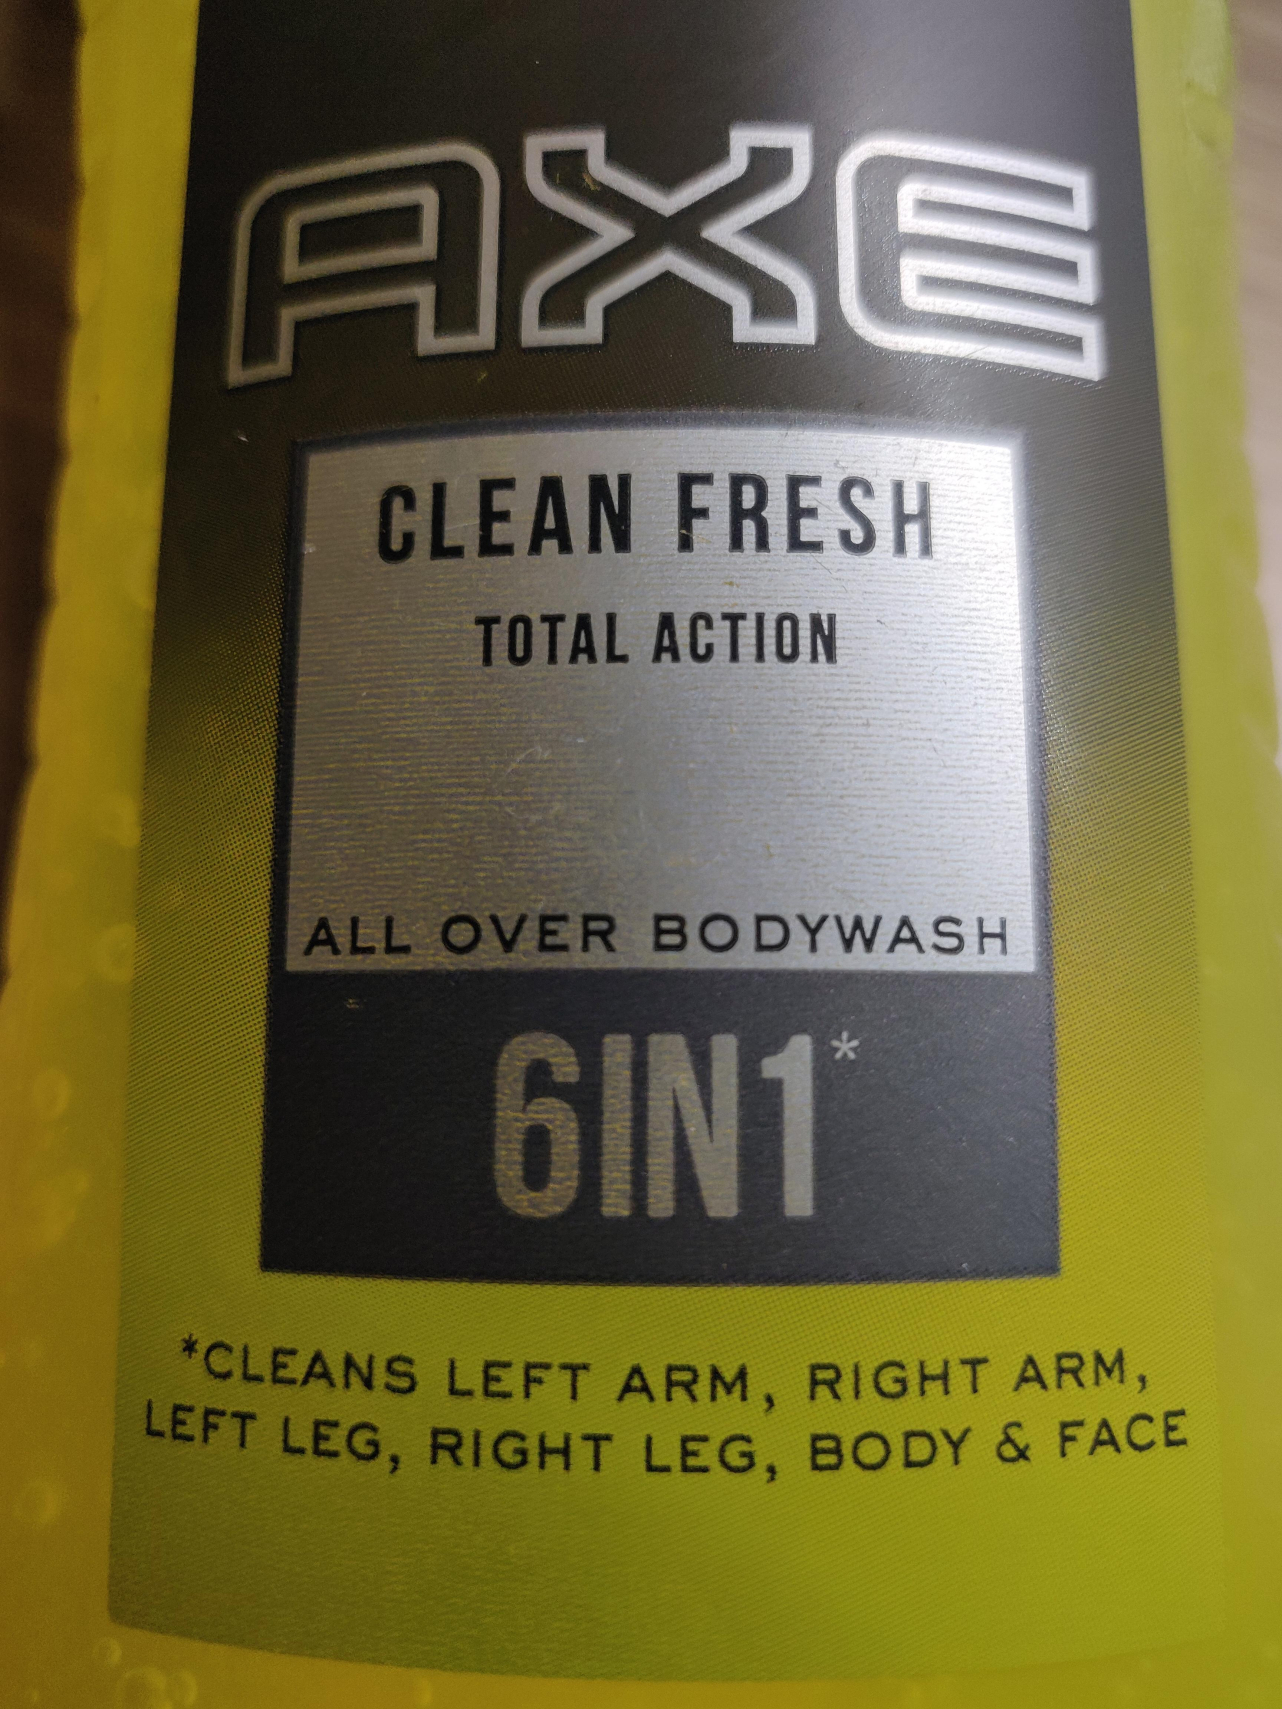 label - Clean Fresh Total Action All Over Bodywash 6IN1 Cleans Left Arm, Right Arm, E Leg, Right Leg Body & Face